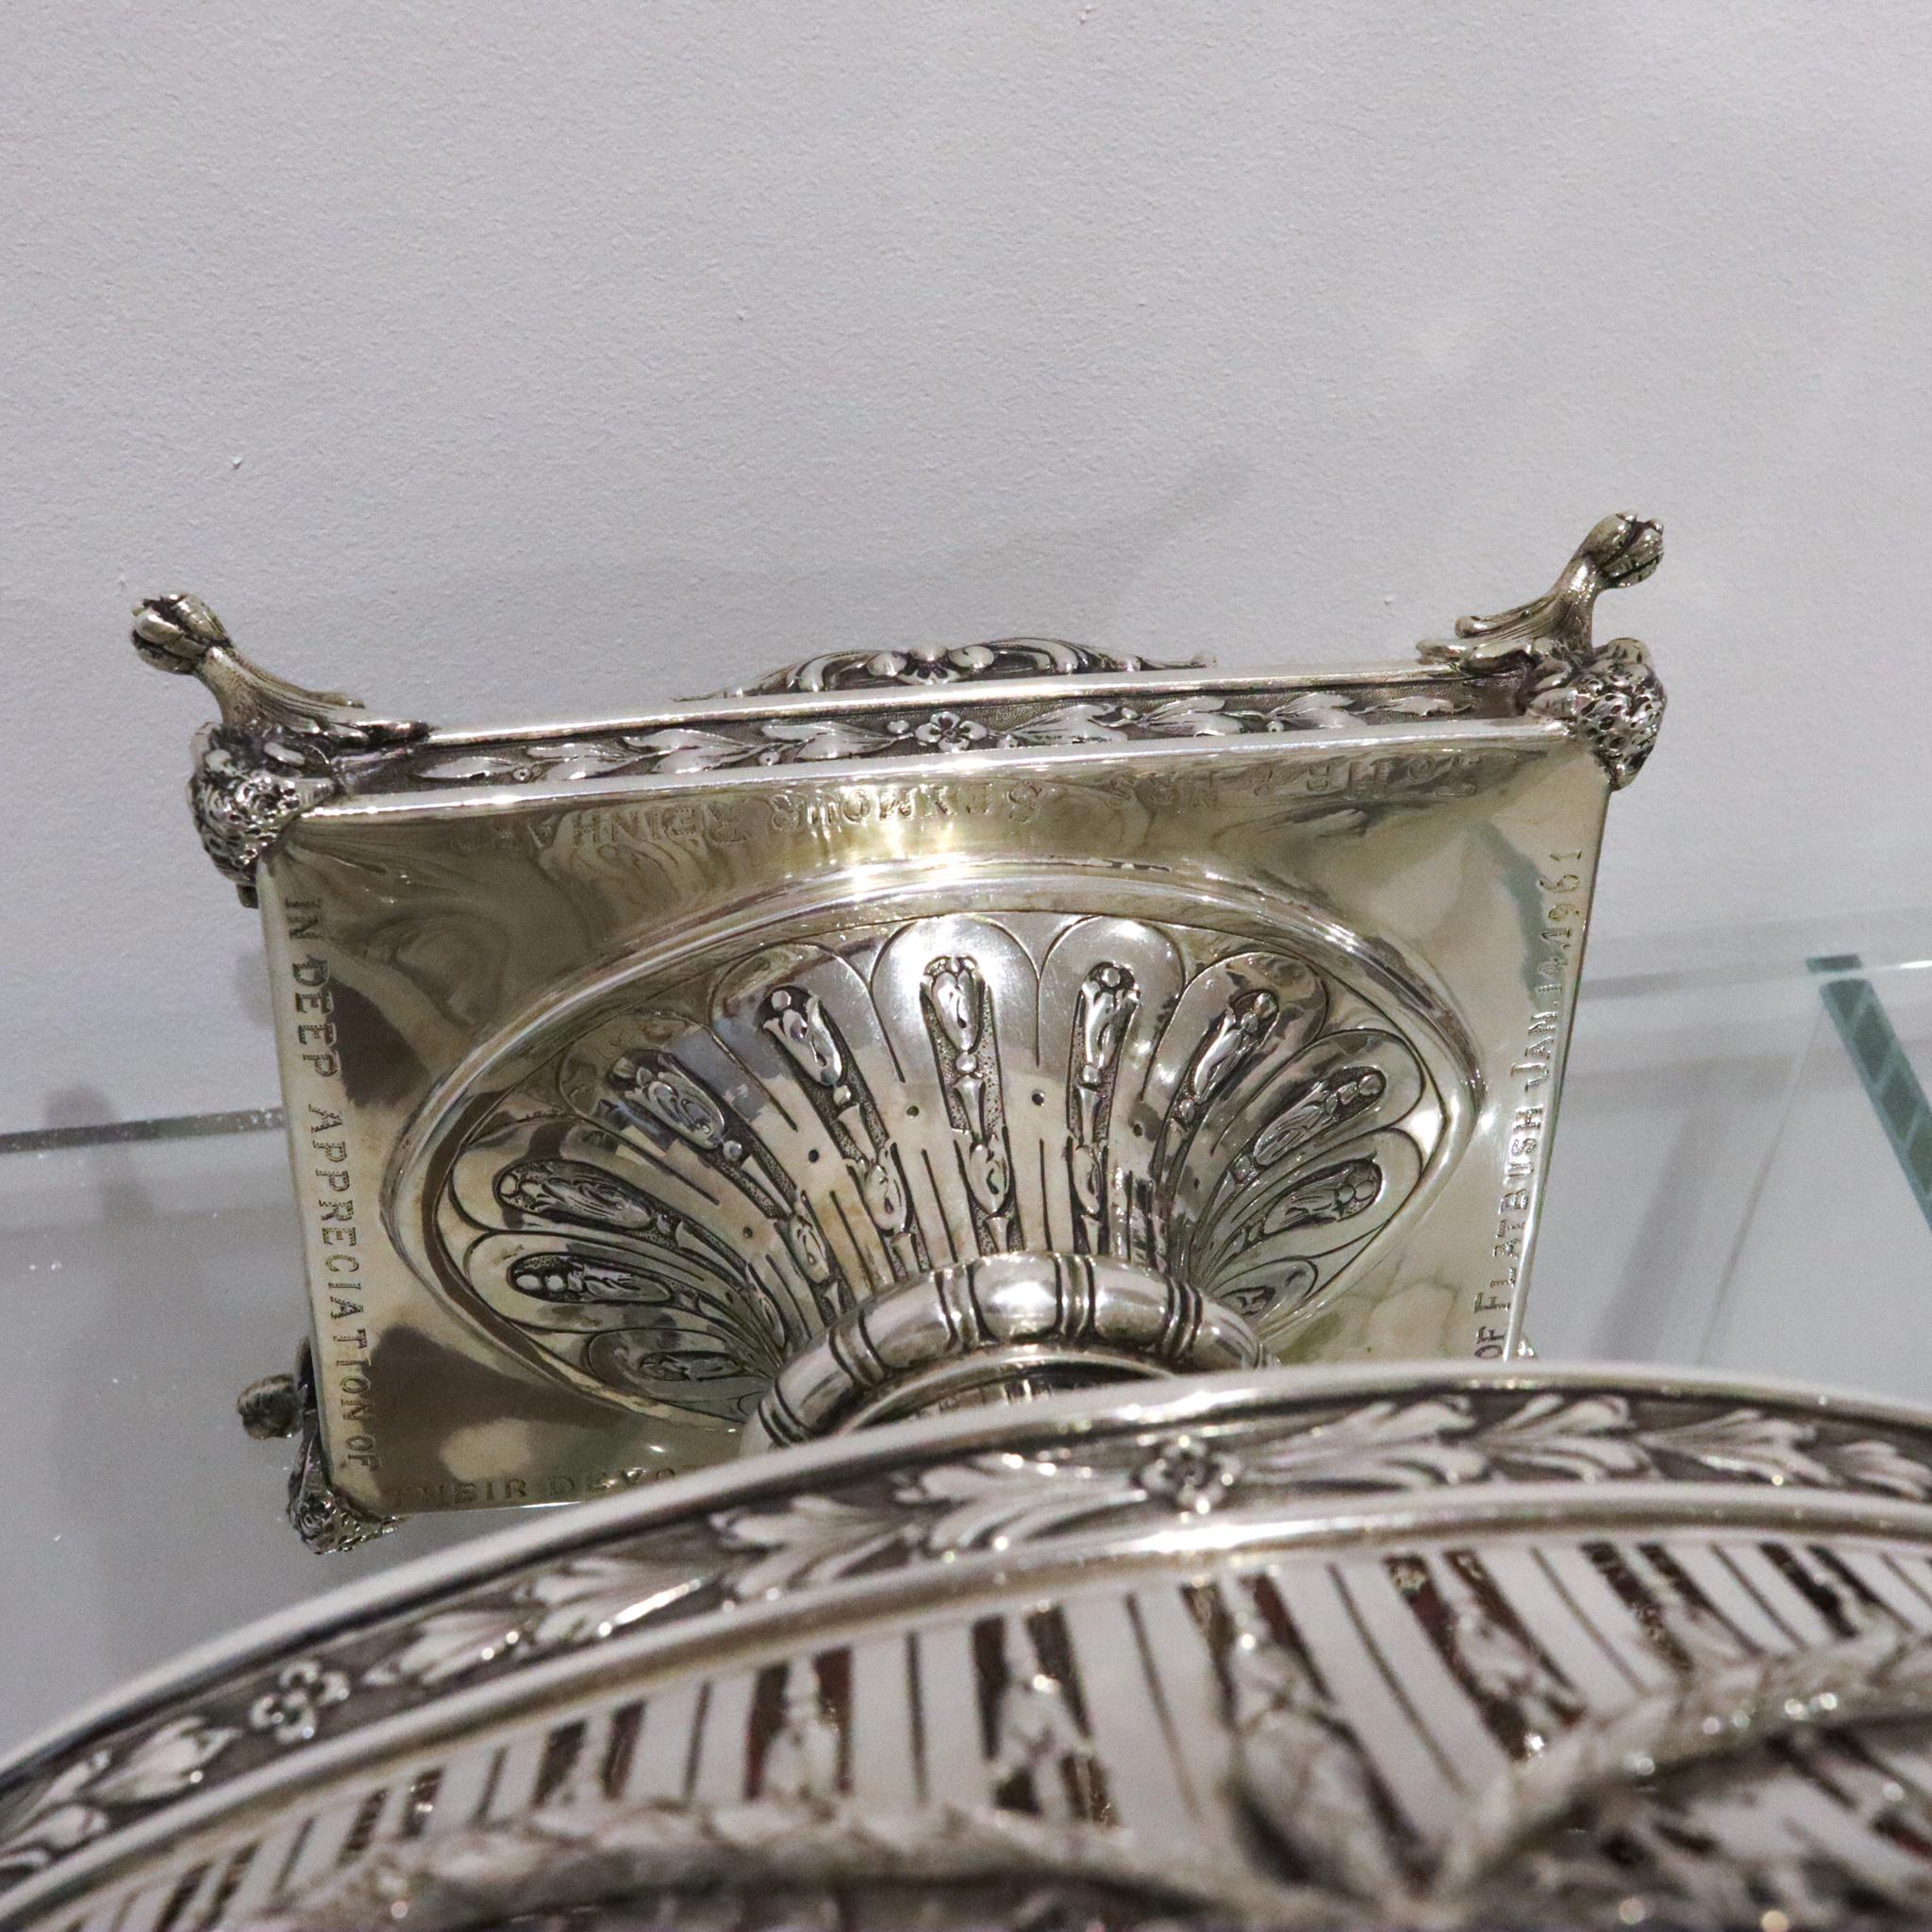 German Neoclassic jardinière in silver by Weinranck & Schmidt-Hanau.

An impressive, oversized and highly decorated piece, made in Hanau Germany by the silversmiths and silver maker's Weinranck & Schmidt during the Imperial period, circa 1889.